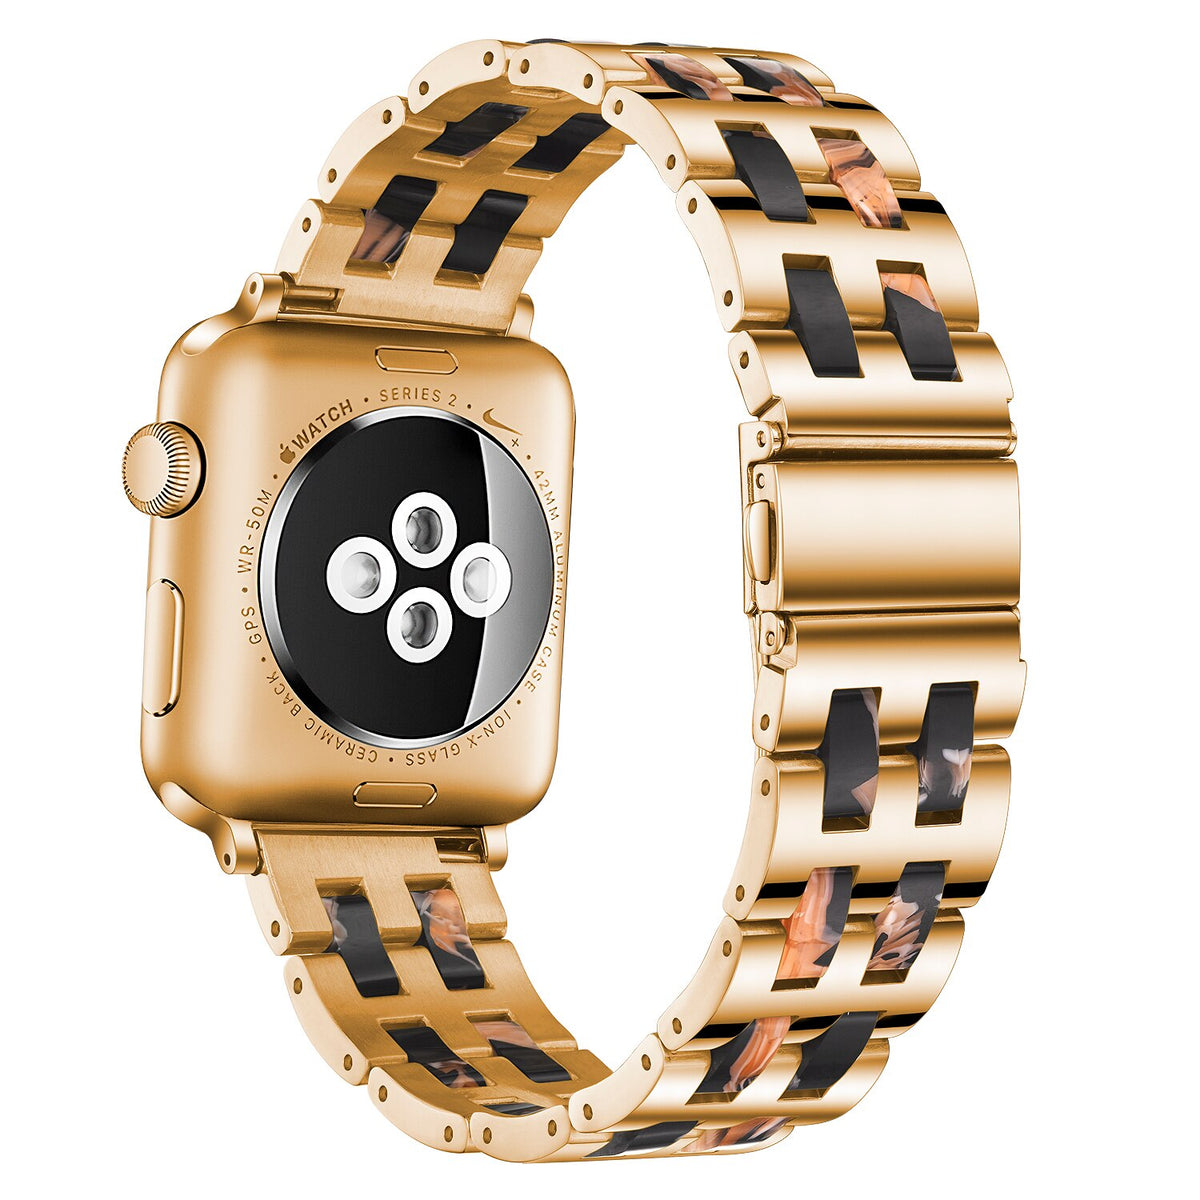 Resin & Stainless Steel Apple Watch Band